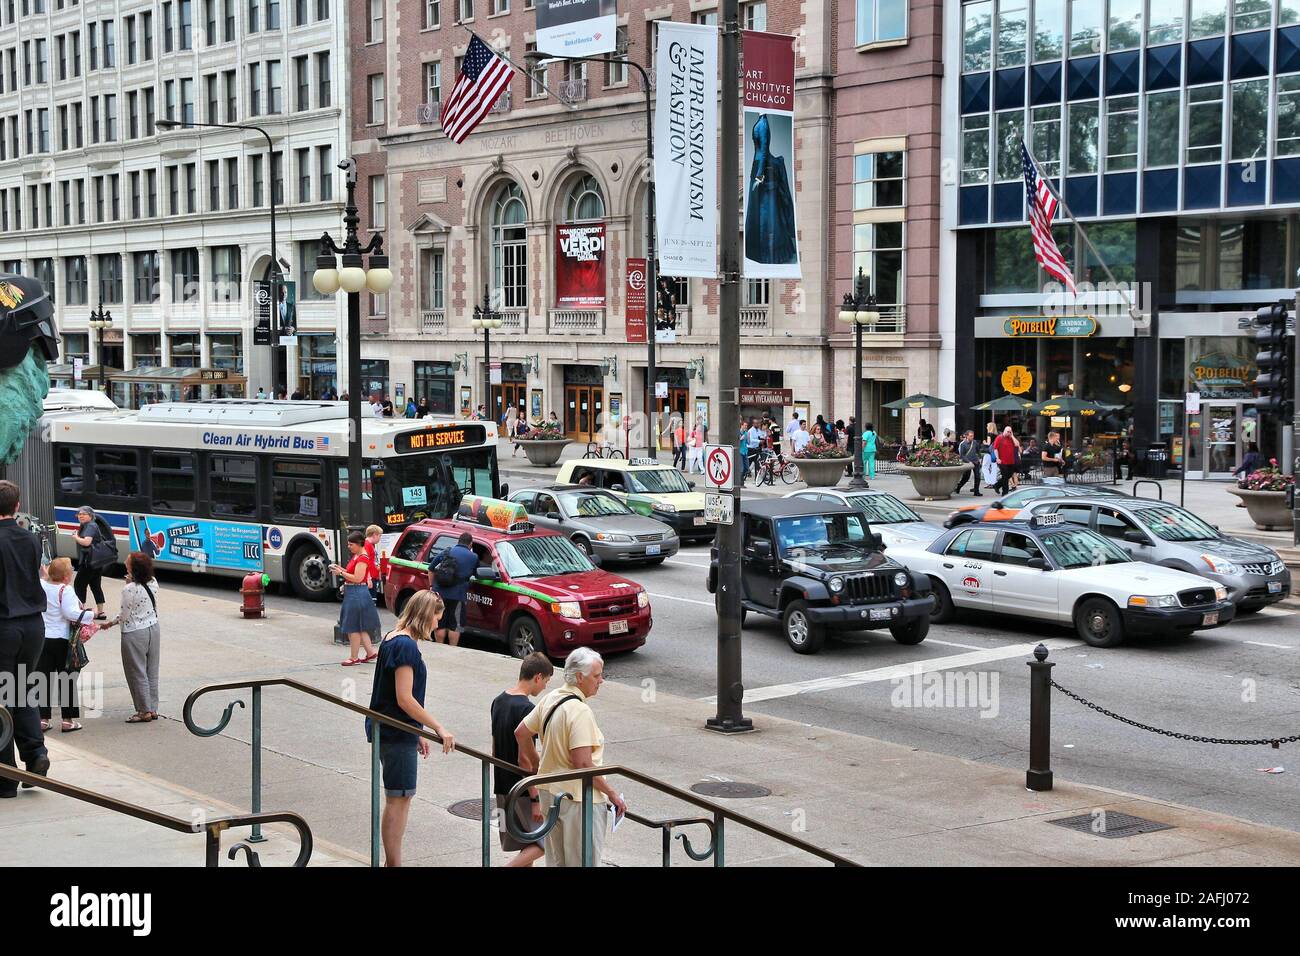 CHICAGO, USA - JUNE 28, 2013: People drive in traffic at Michigan Avenue in downtown Chicago. Chicago is the 3rd most populous US city with 2.7 millio Stock Photo